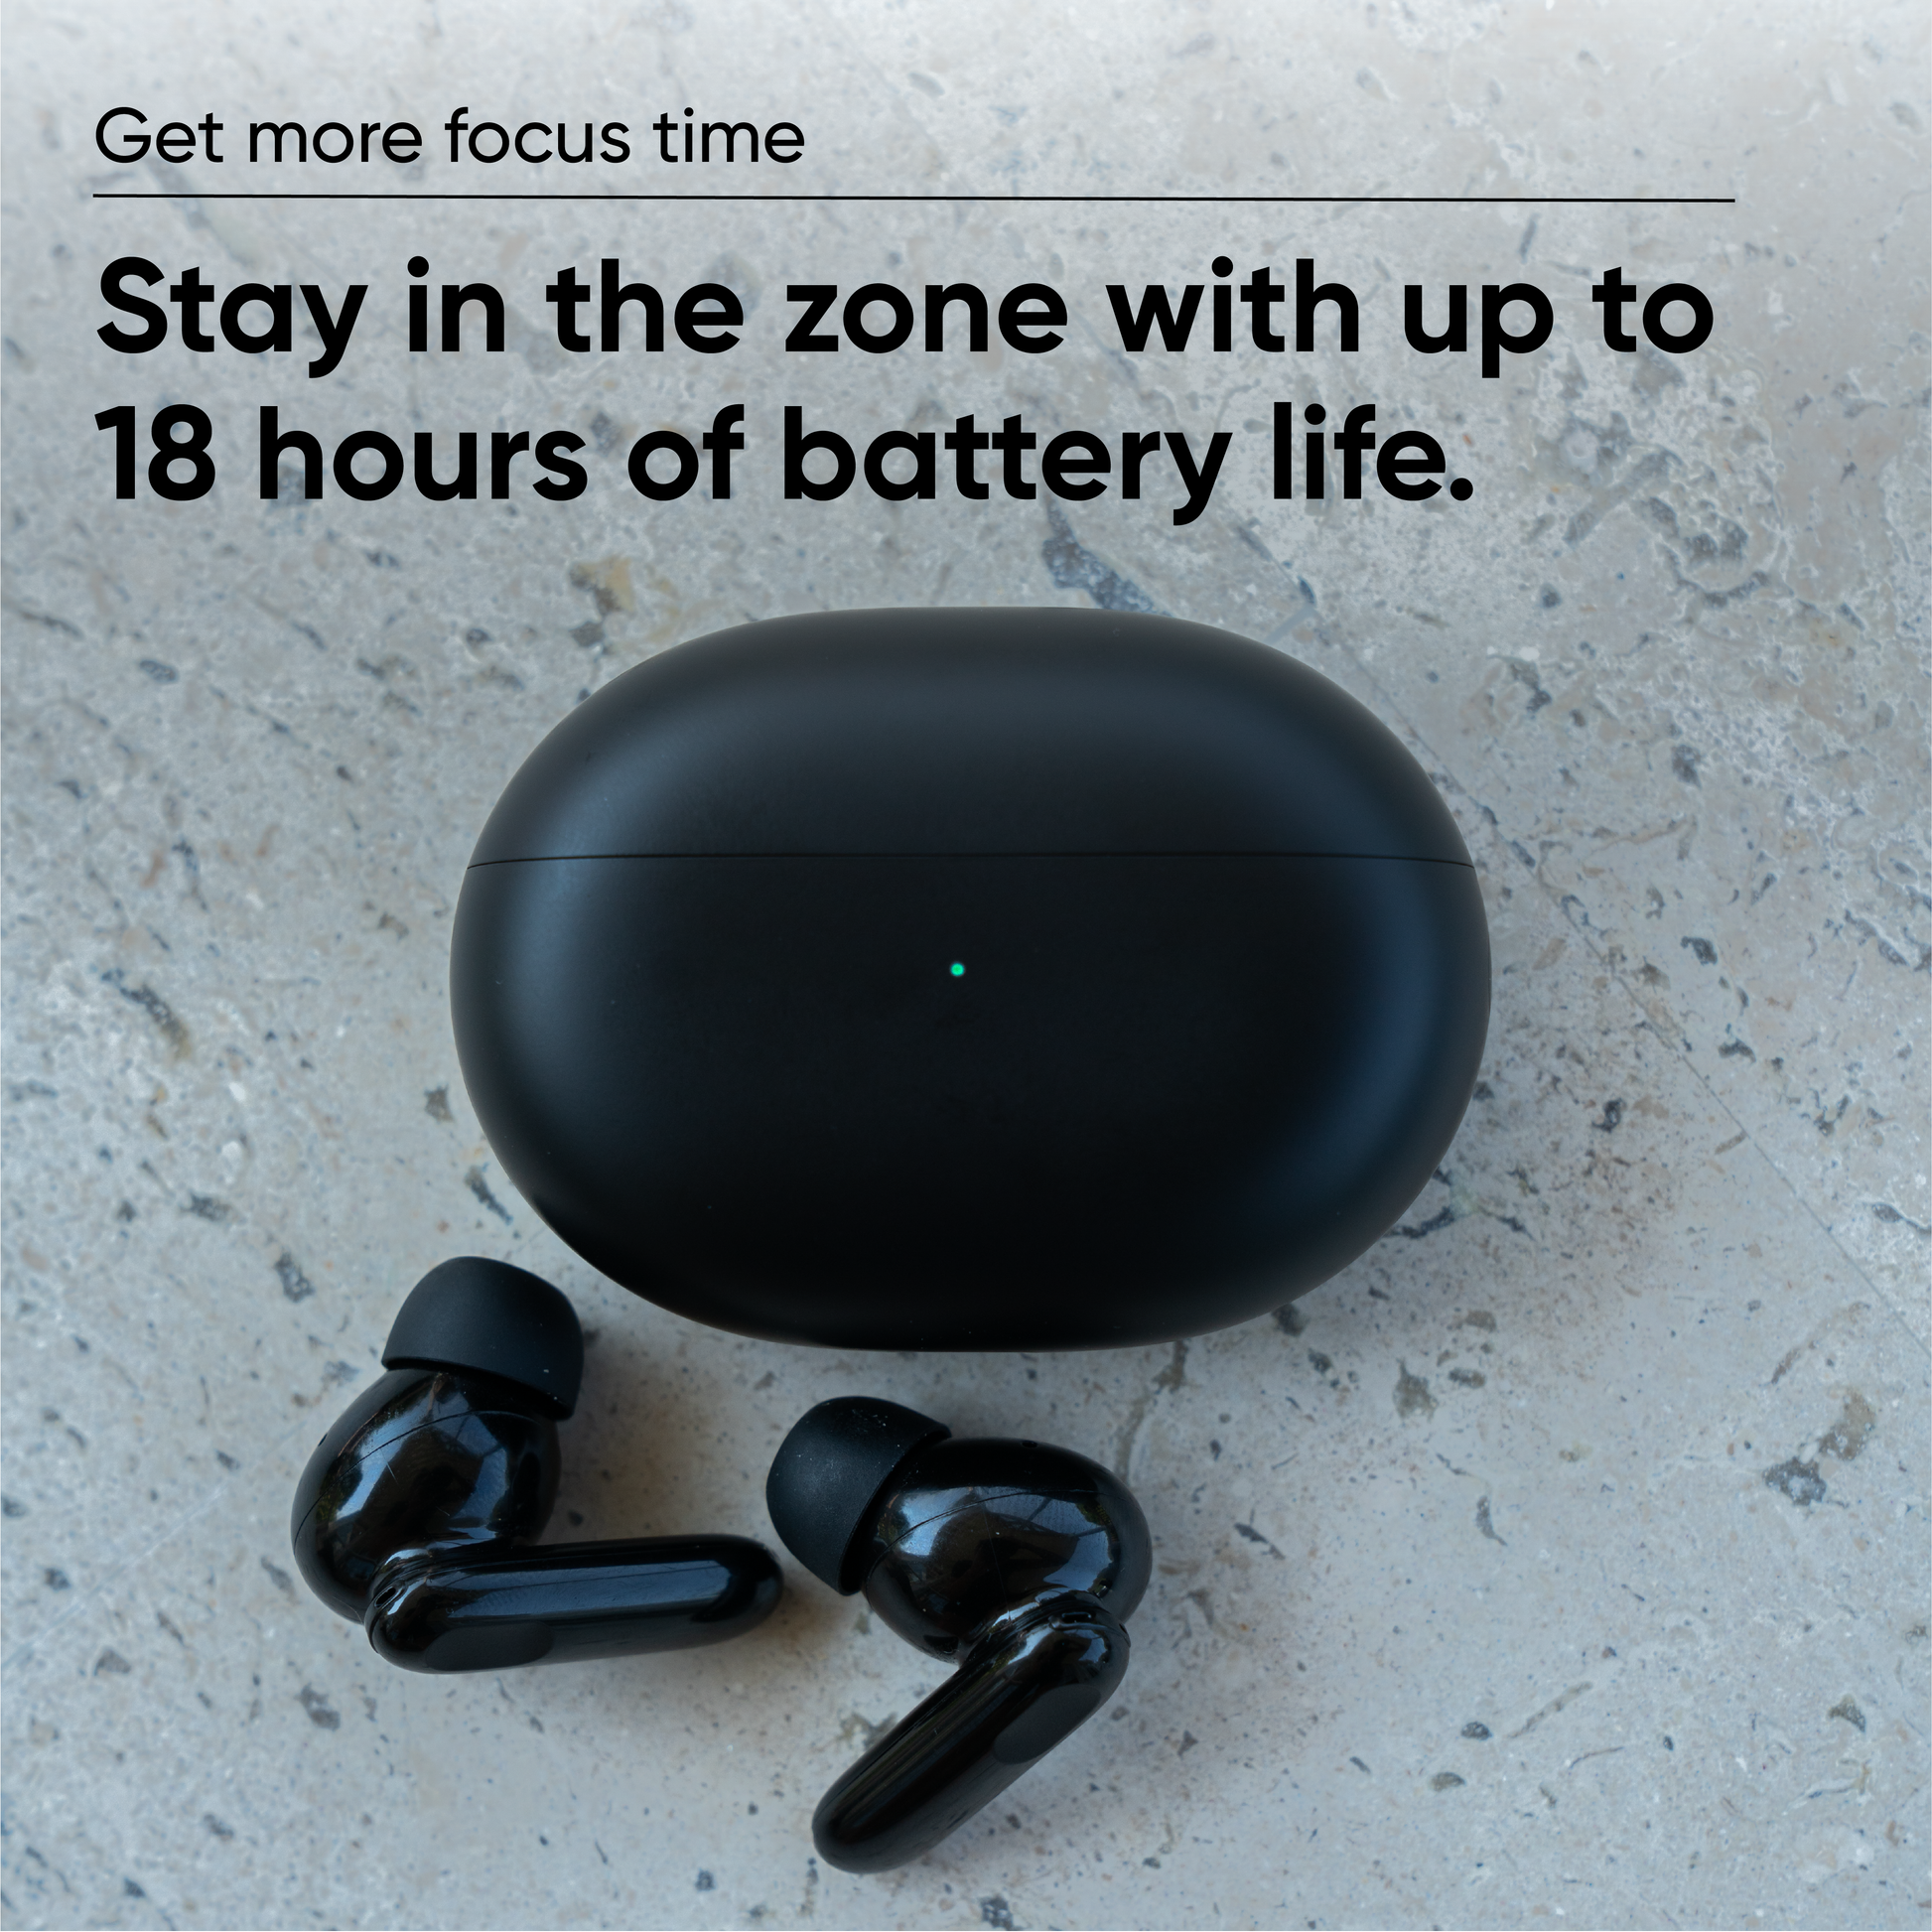 Wyze Buds Pro charging case and earbuds with text overlay that says, "Stay in the zone with up to 18 hours of battery life."